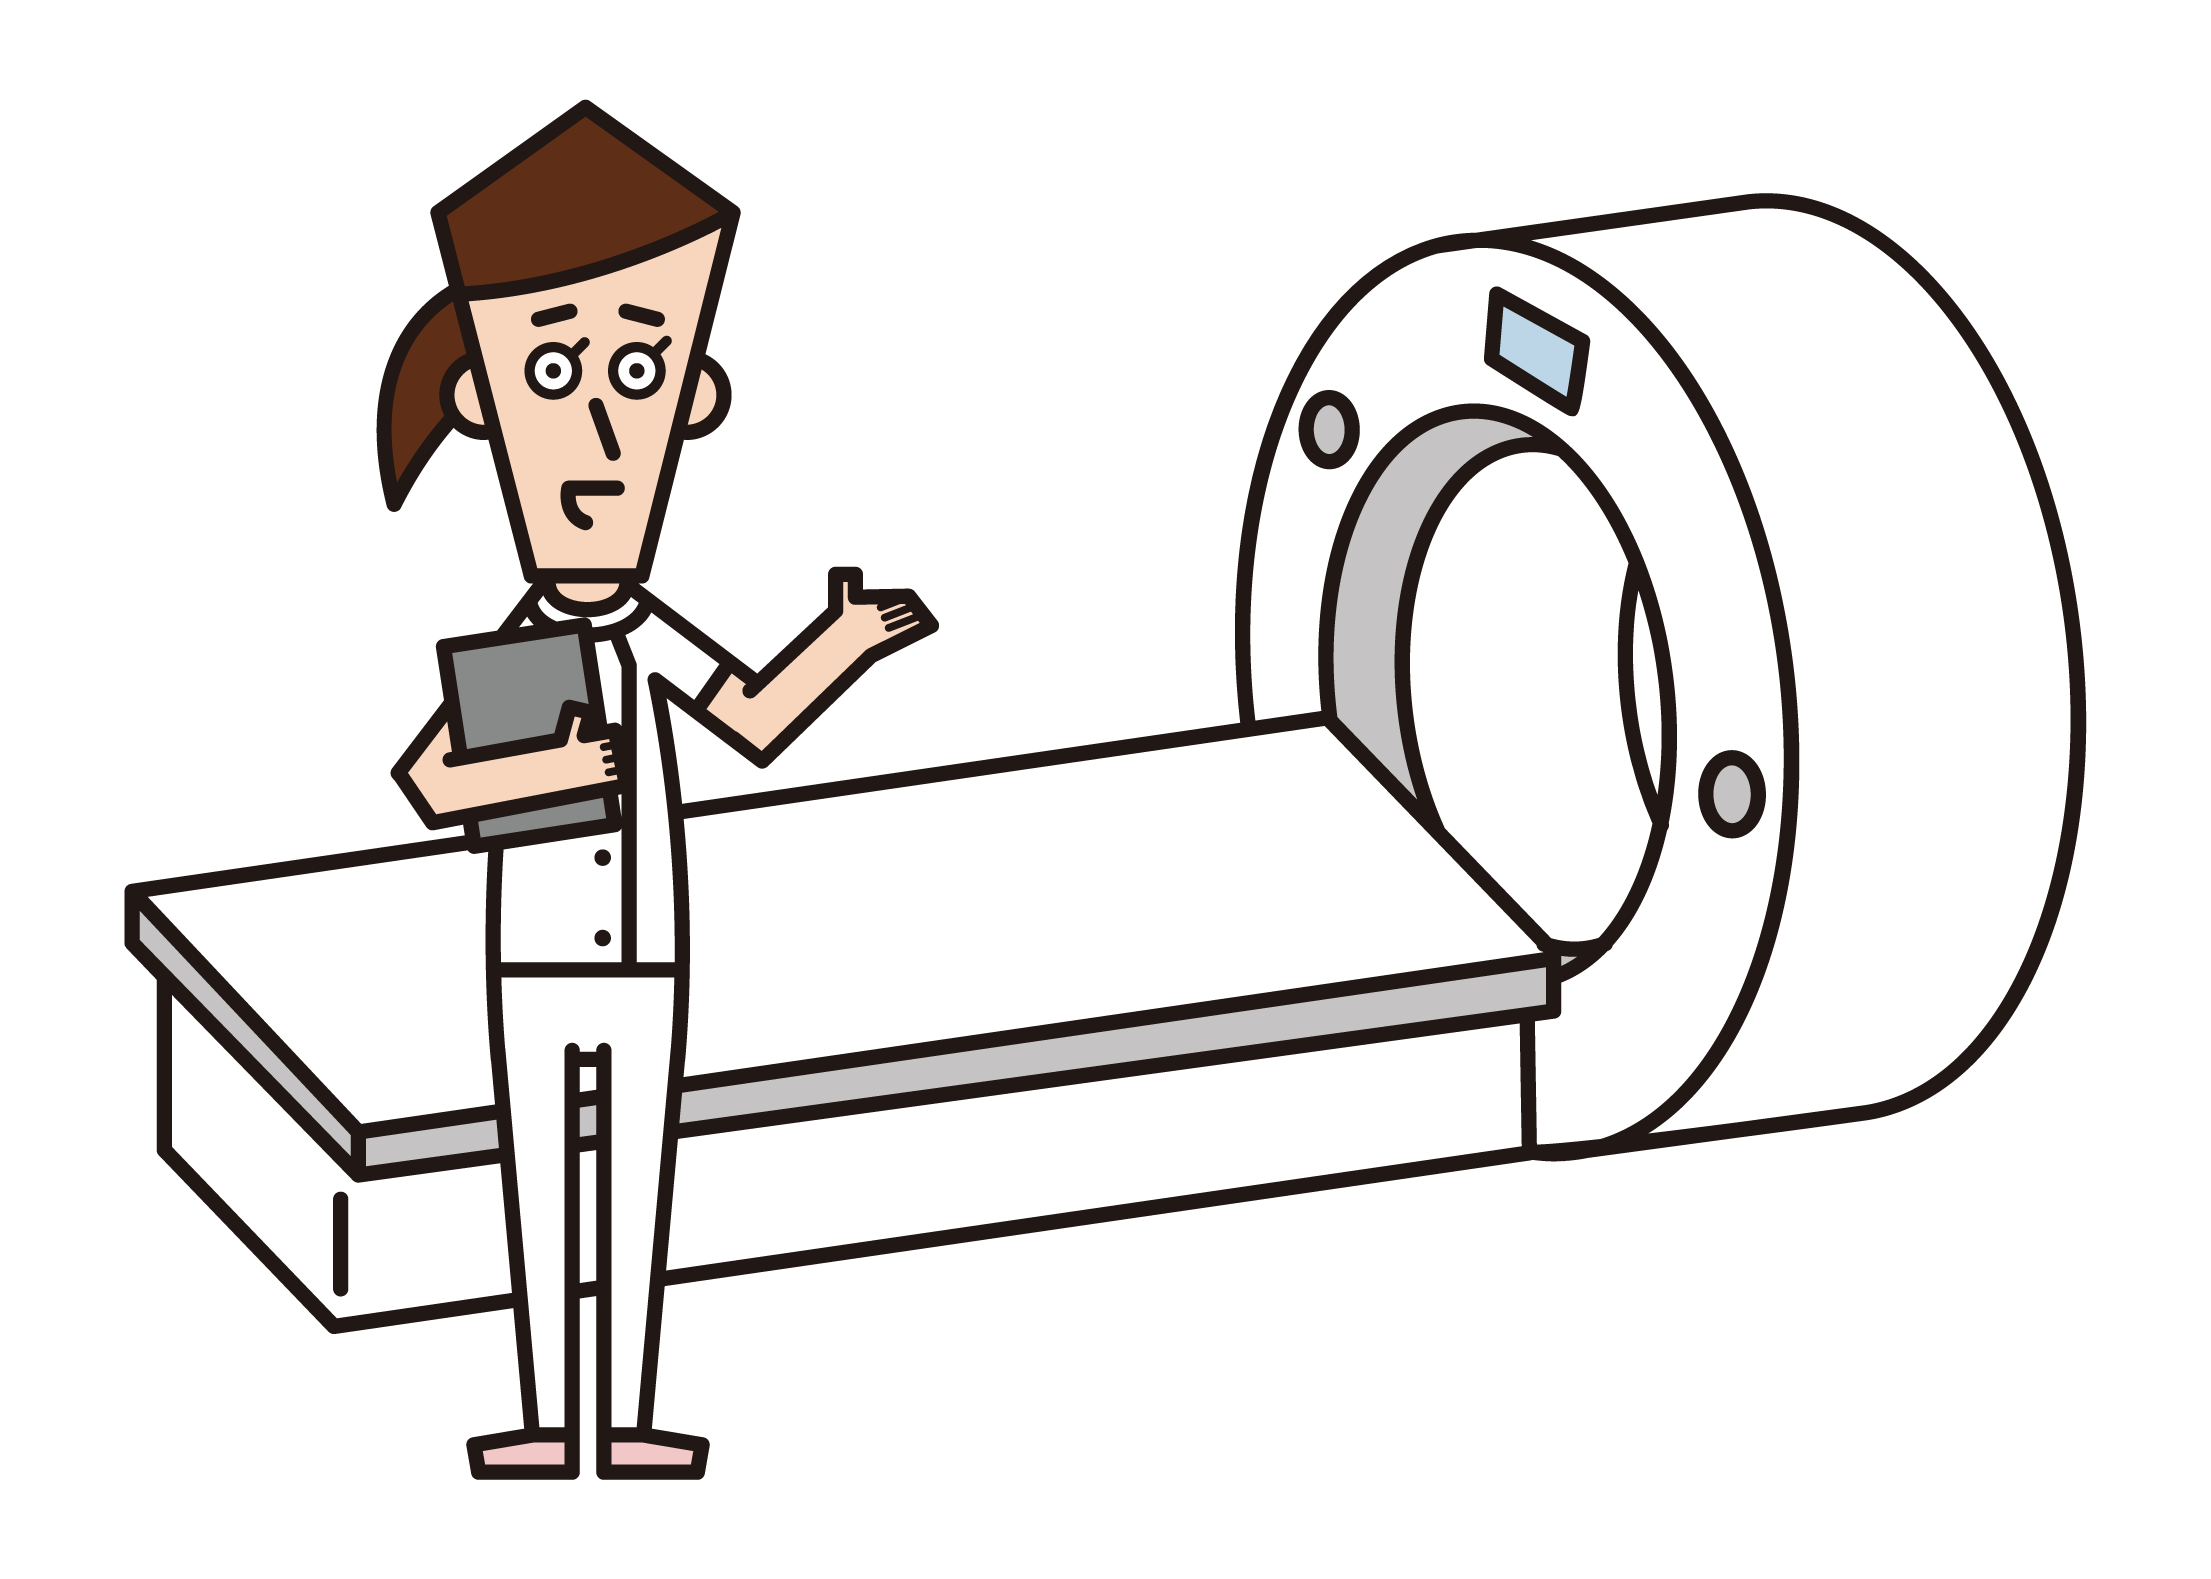 Illustration of a woman who underwent an MRI examination